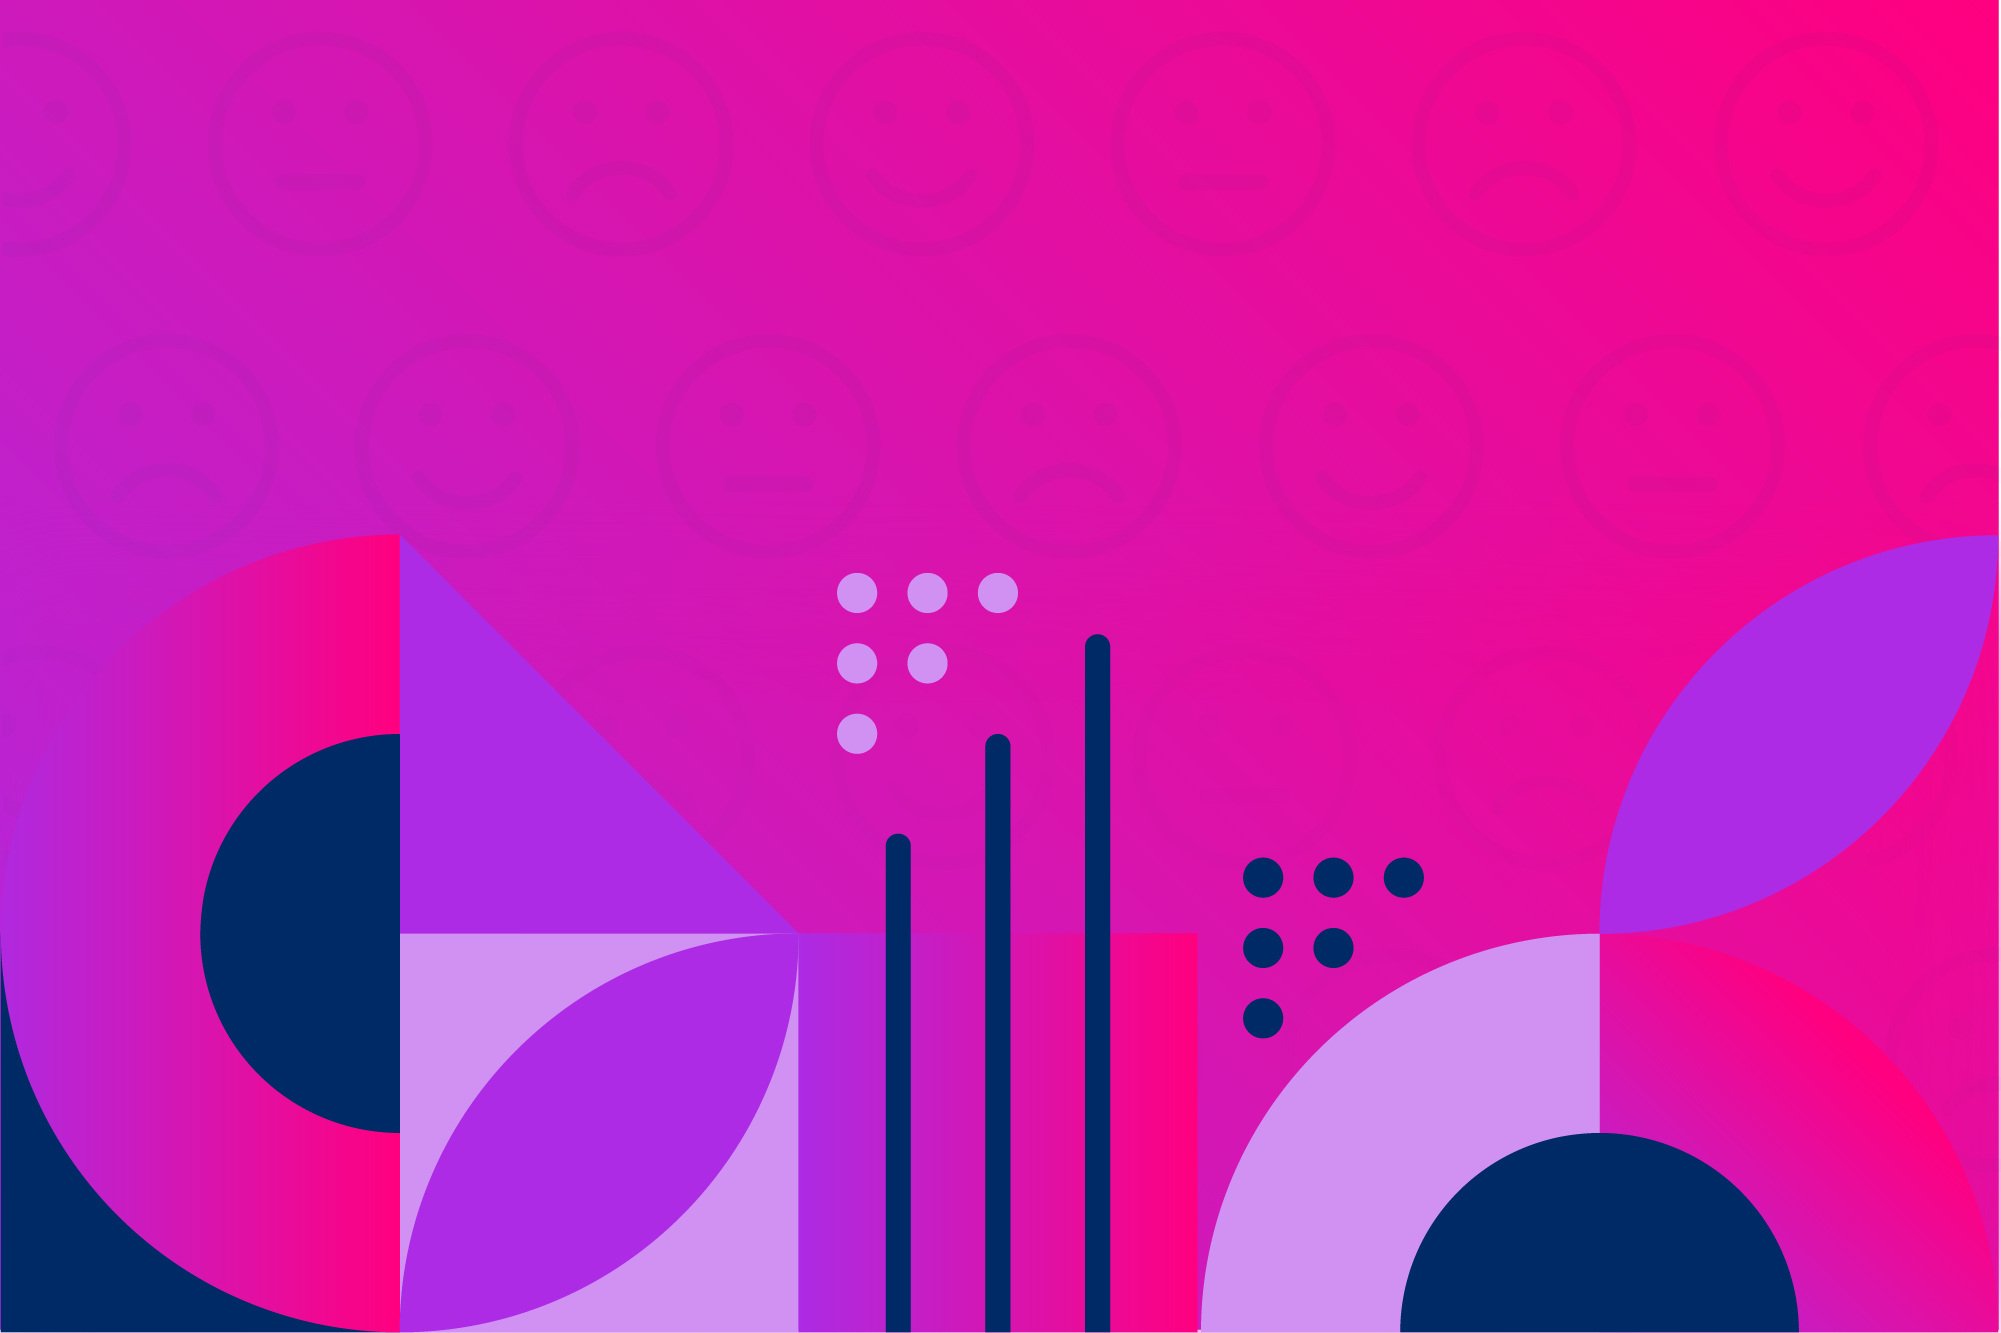 Image of pink and purple shapes representing data an article about the TikTok ban.